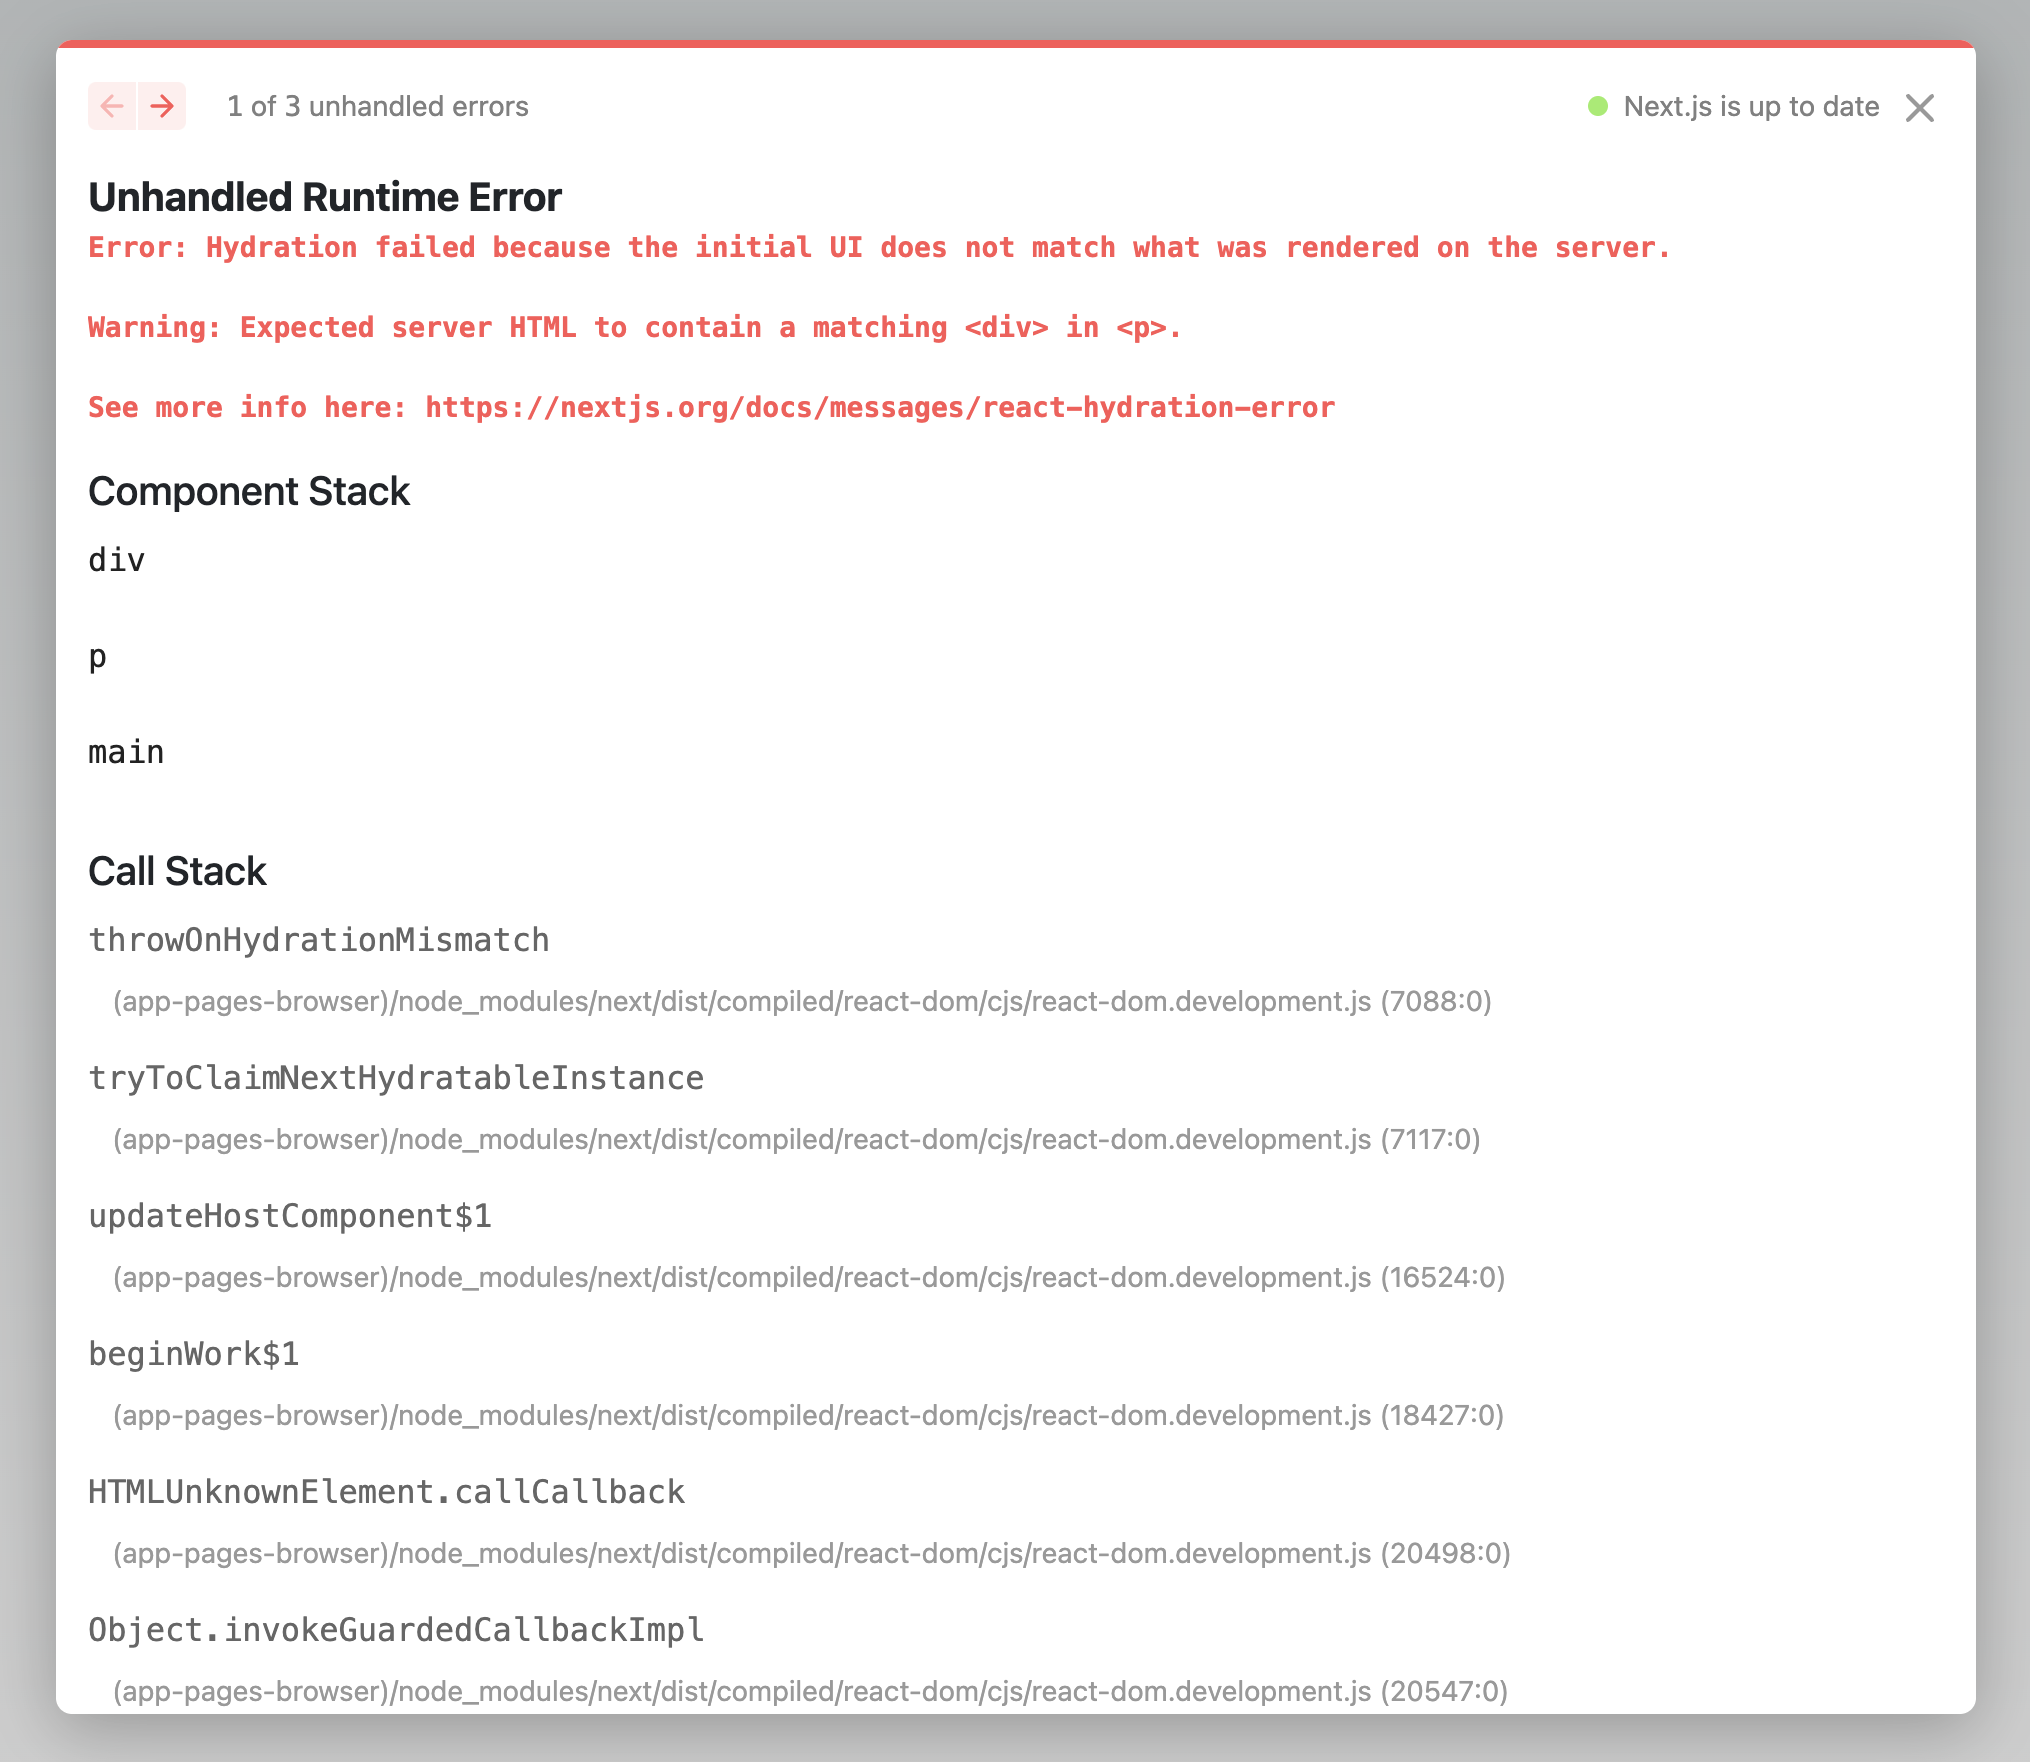 An example of the Next.js error overlay before version 14.2.